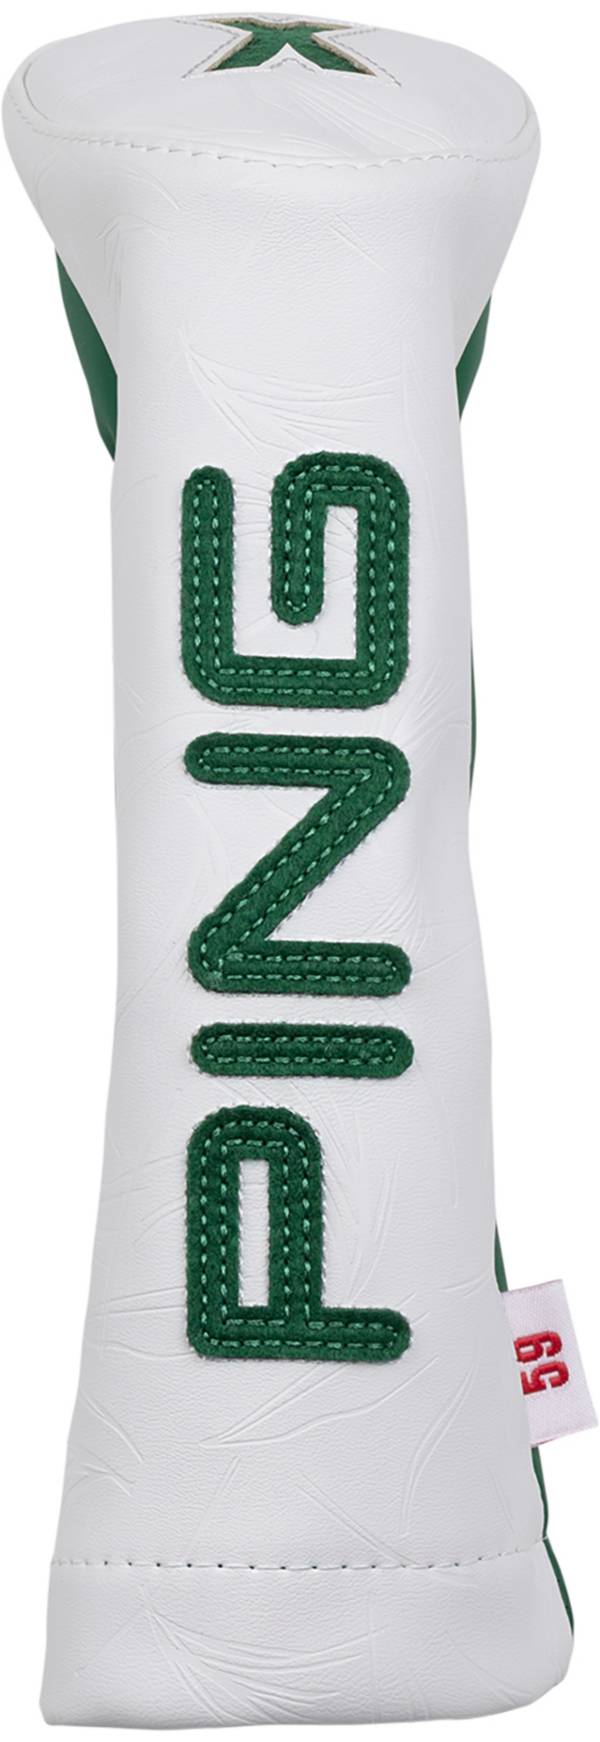 PING Looper Hybrid Headcover product image